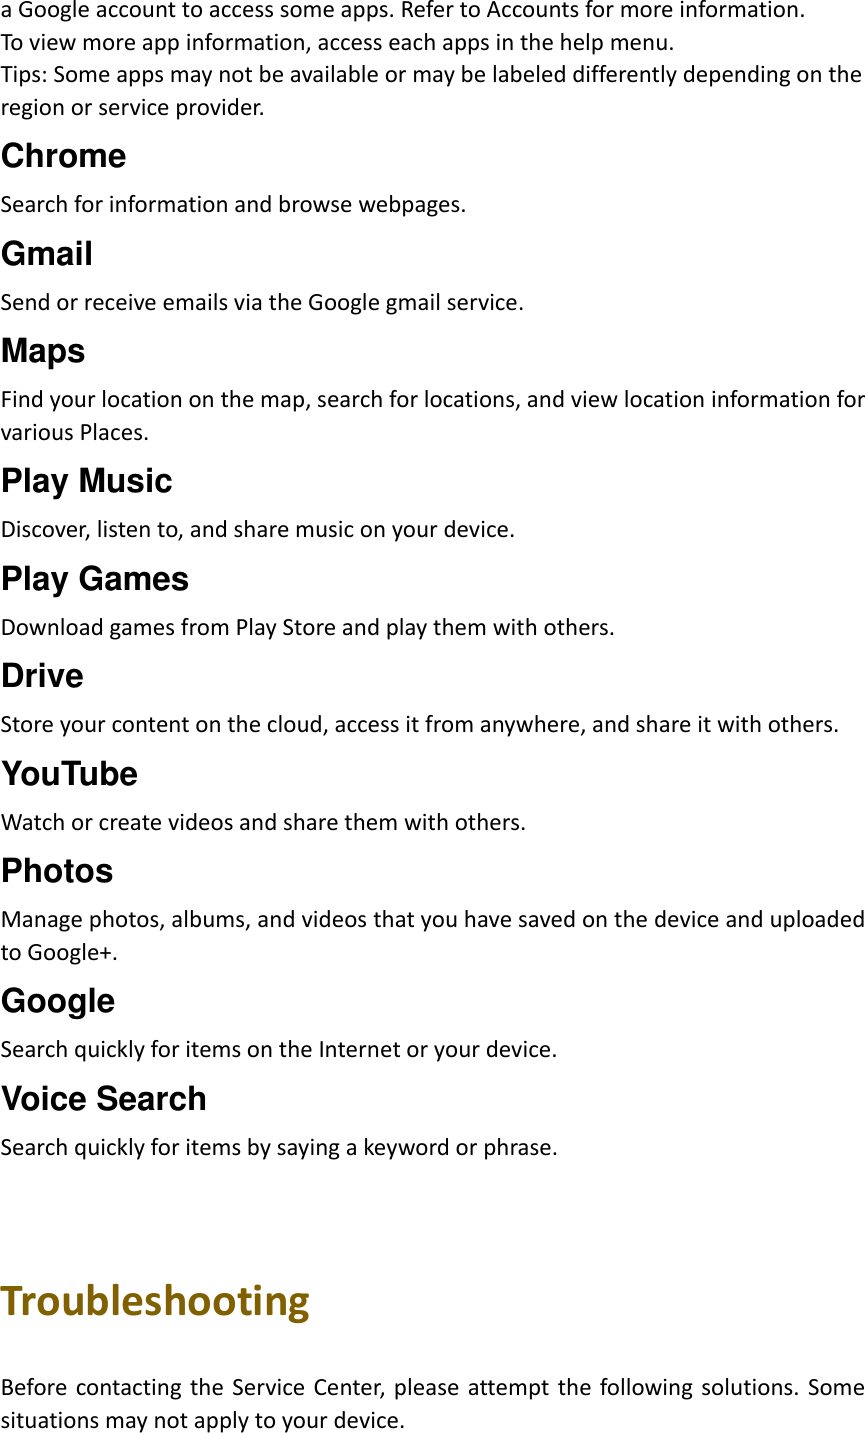 a Google account to access some apps. Refer to Accounts for more information. To view more app information, access each apps in the help menu. Tips: Some apps may not be available or may be labeled differently depending on the   region or service provider. Chrome Search for information and browse webpages. Gmail Send or receive emails via the Google gmail service. Maps Find your location on the map, search for locations, and view location information for various Places. Play Music Discover, listen to, and share music on your device. Play Games Download games from Play Store and play them with others. Drive Store your content on the cloud, access it from anywhere, and share it with others. YouTube Watch or create videos and share them with others. Photos Manage photos, albums, and videos that you have saved on the device and uploaded to Google+. Google Search quickly for items on the Internet or your device. Voice Search Search quickly for items by saying a keyword or phrase.    Troubleshooting  Before contacting the  Service Center, please  attempt the  following solutions. Some situations may not apply to your device. 